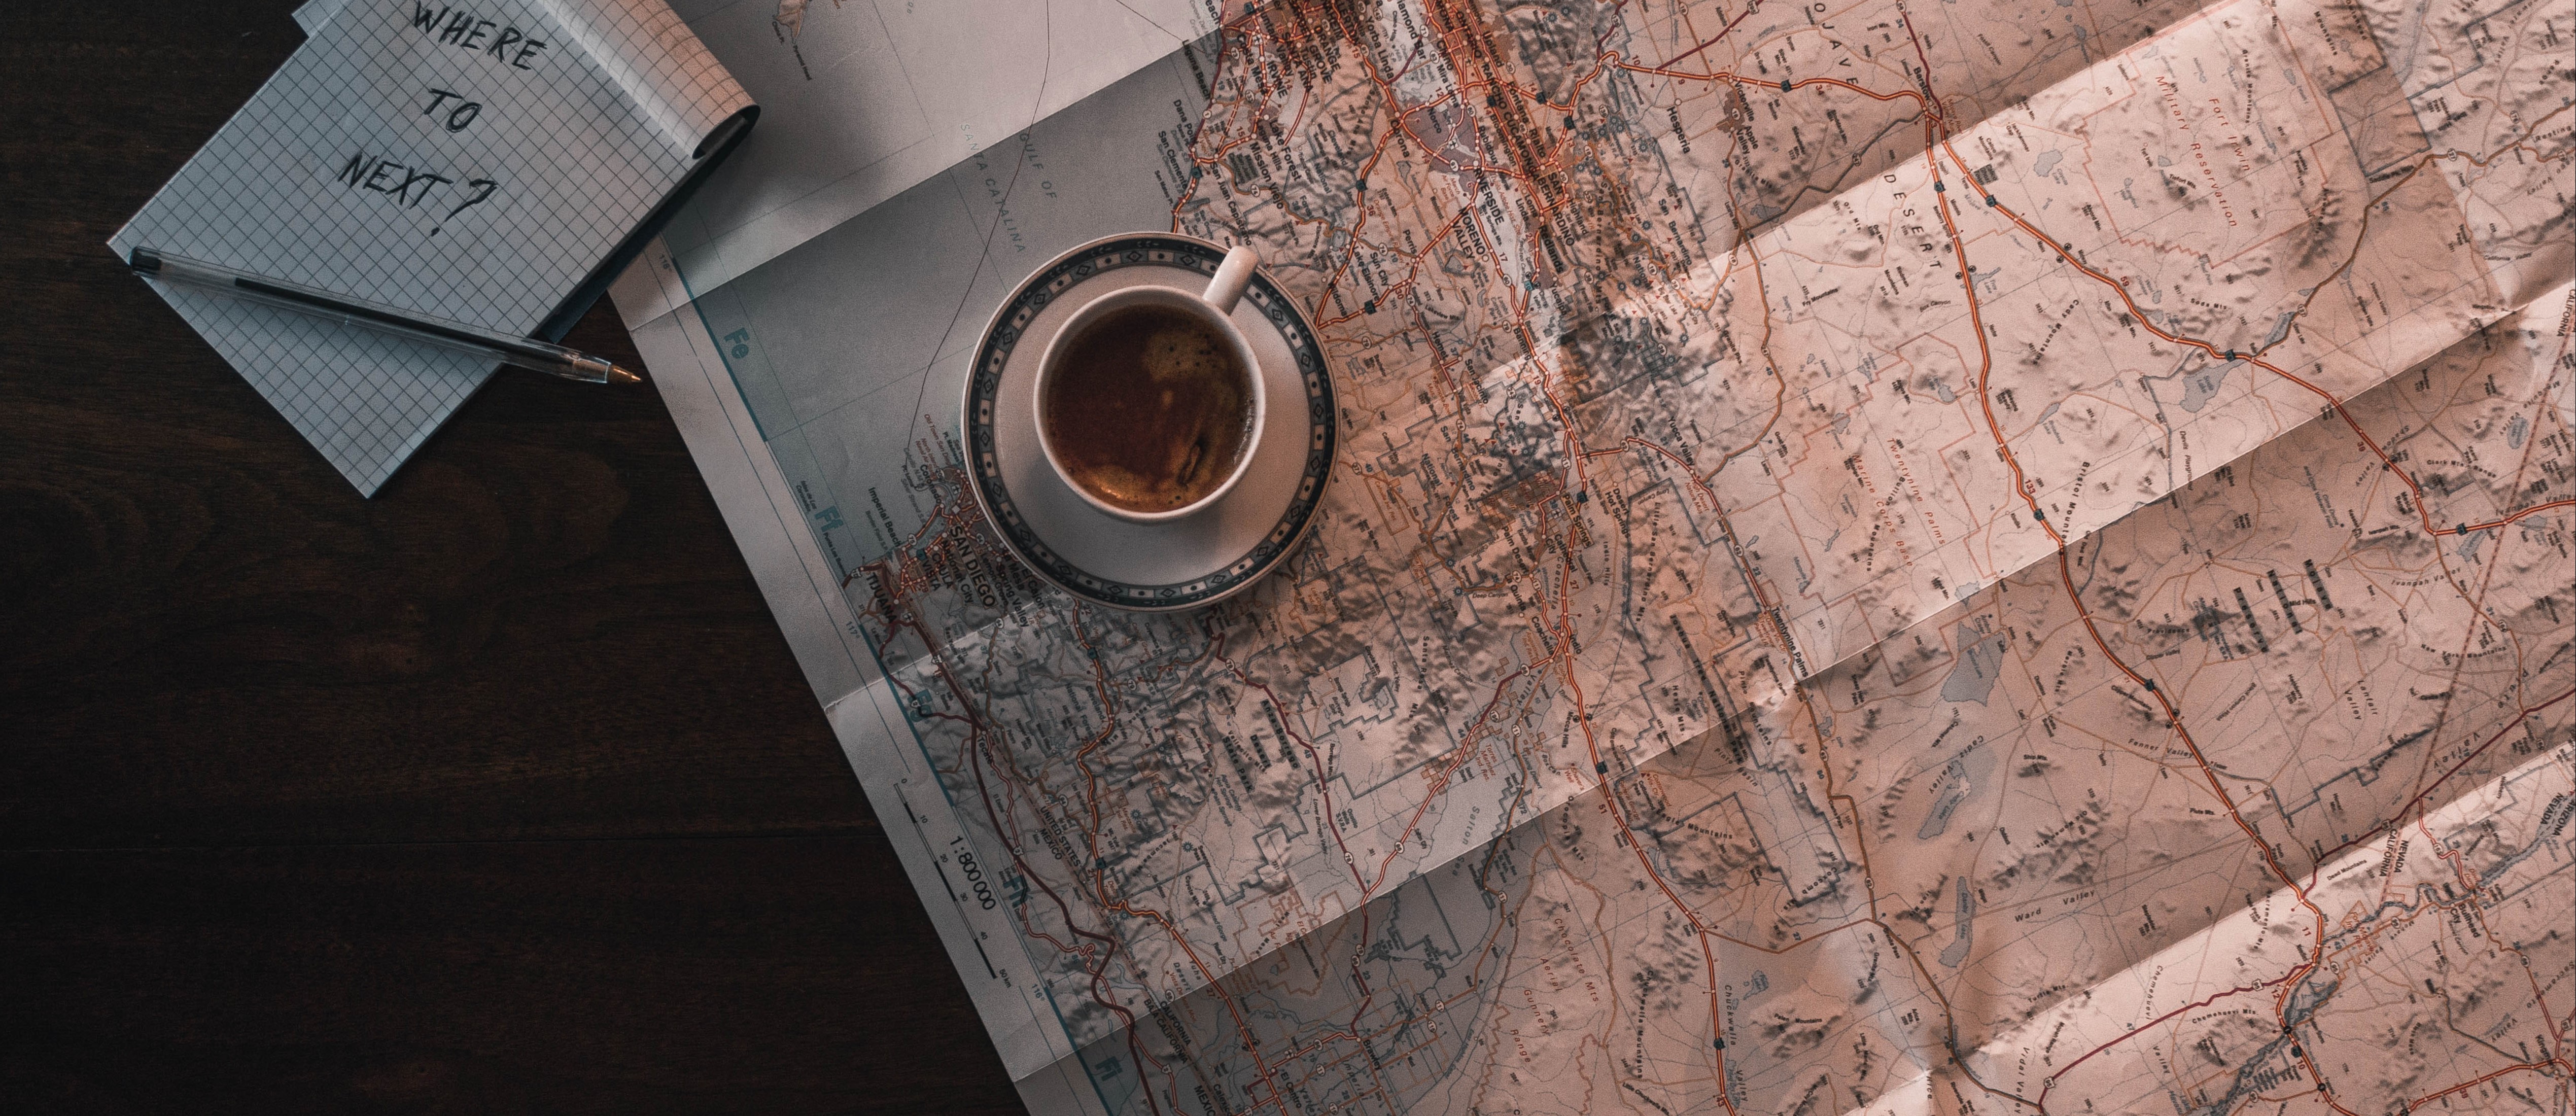 Top-down shot of full coffee cup sitting on paper map. Notebook next to the coffee cup reads: 'Where to next?' 